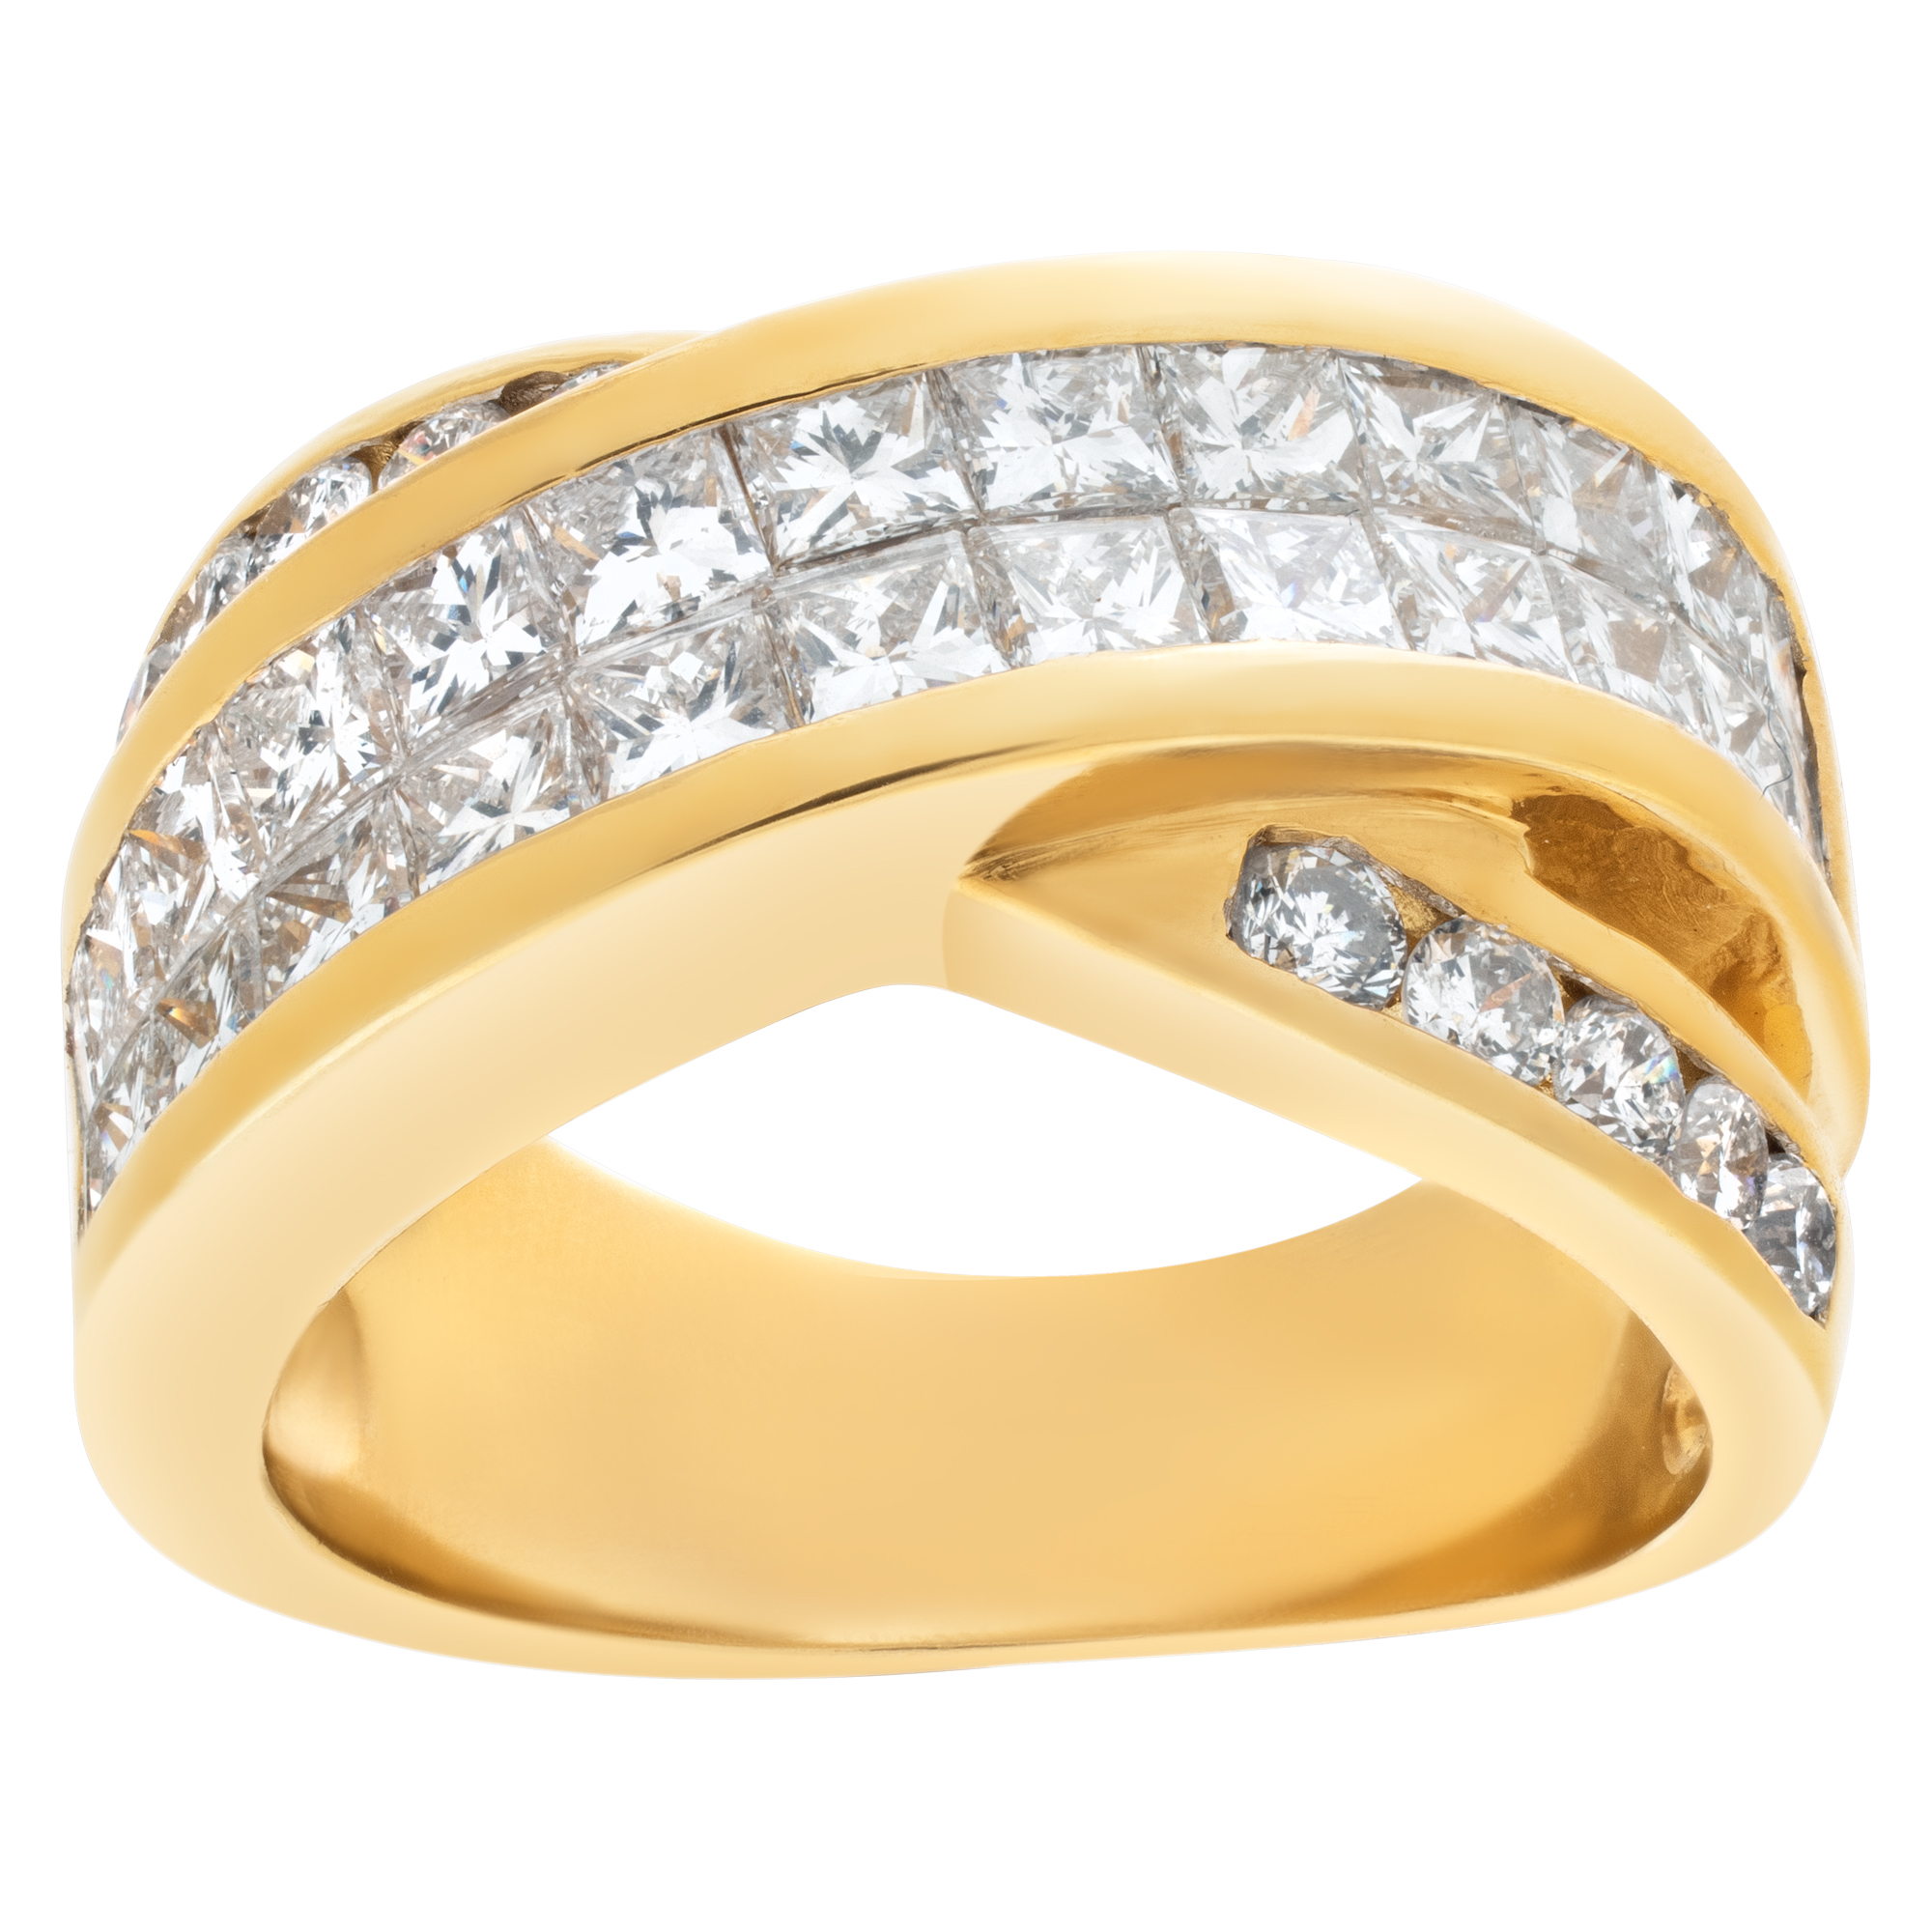 Stunning 18k criss cross diamond ring with over 3 carats in princess and round cut diamonds